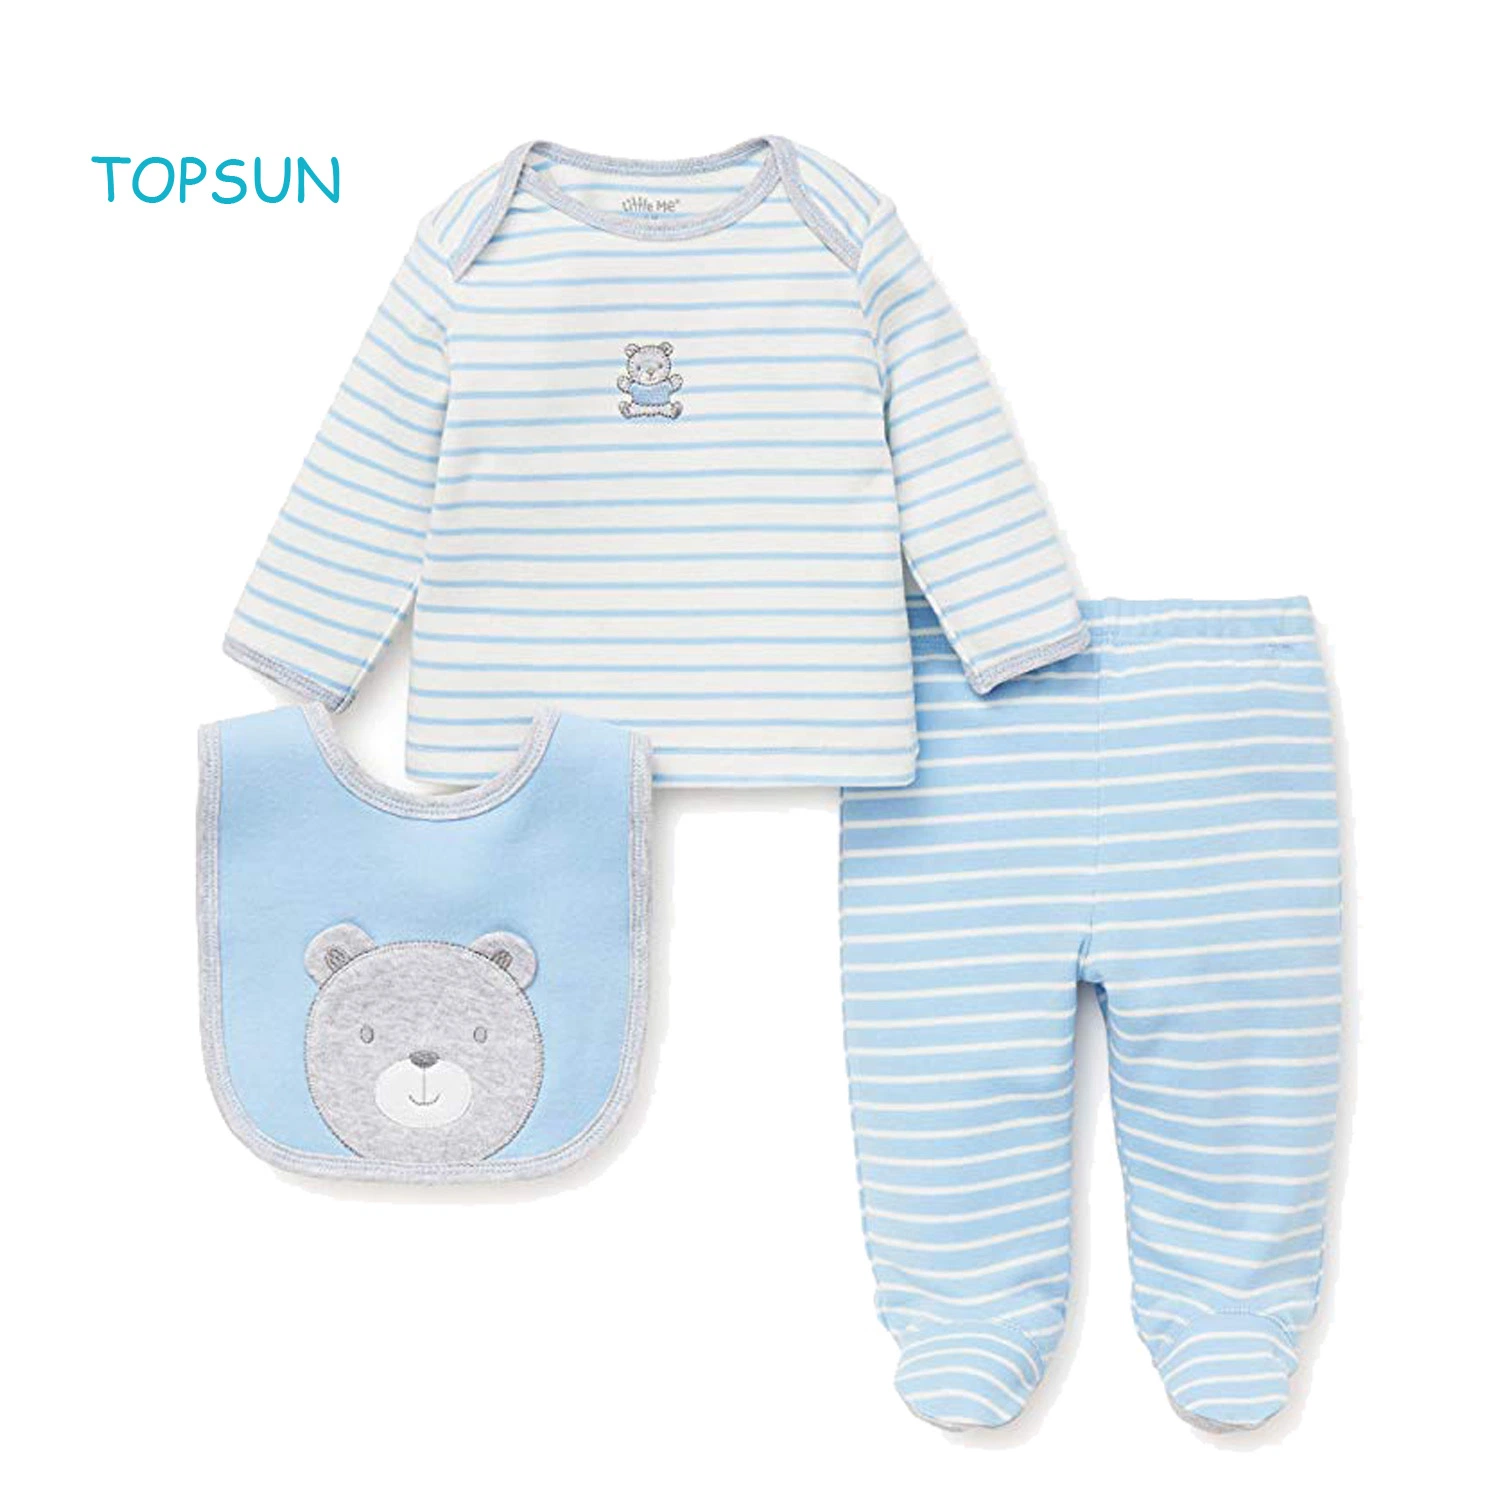 3PCS Newborn High Quality Skin-Friendly Fabric Clothes Unisex Outfits Children Baby Gifts Layette Sets with Bib